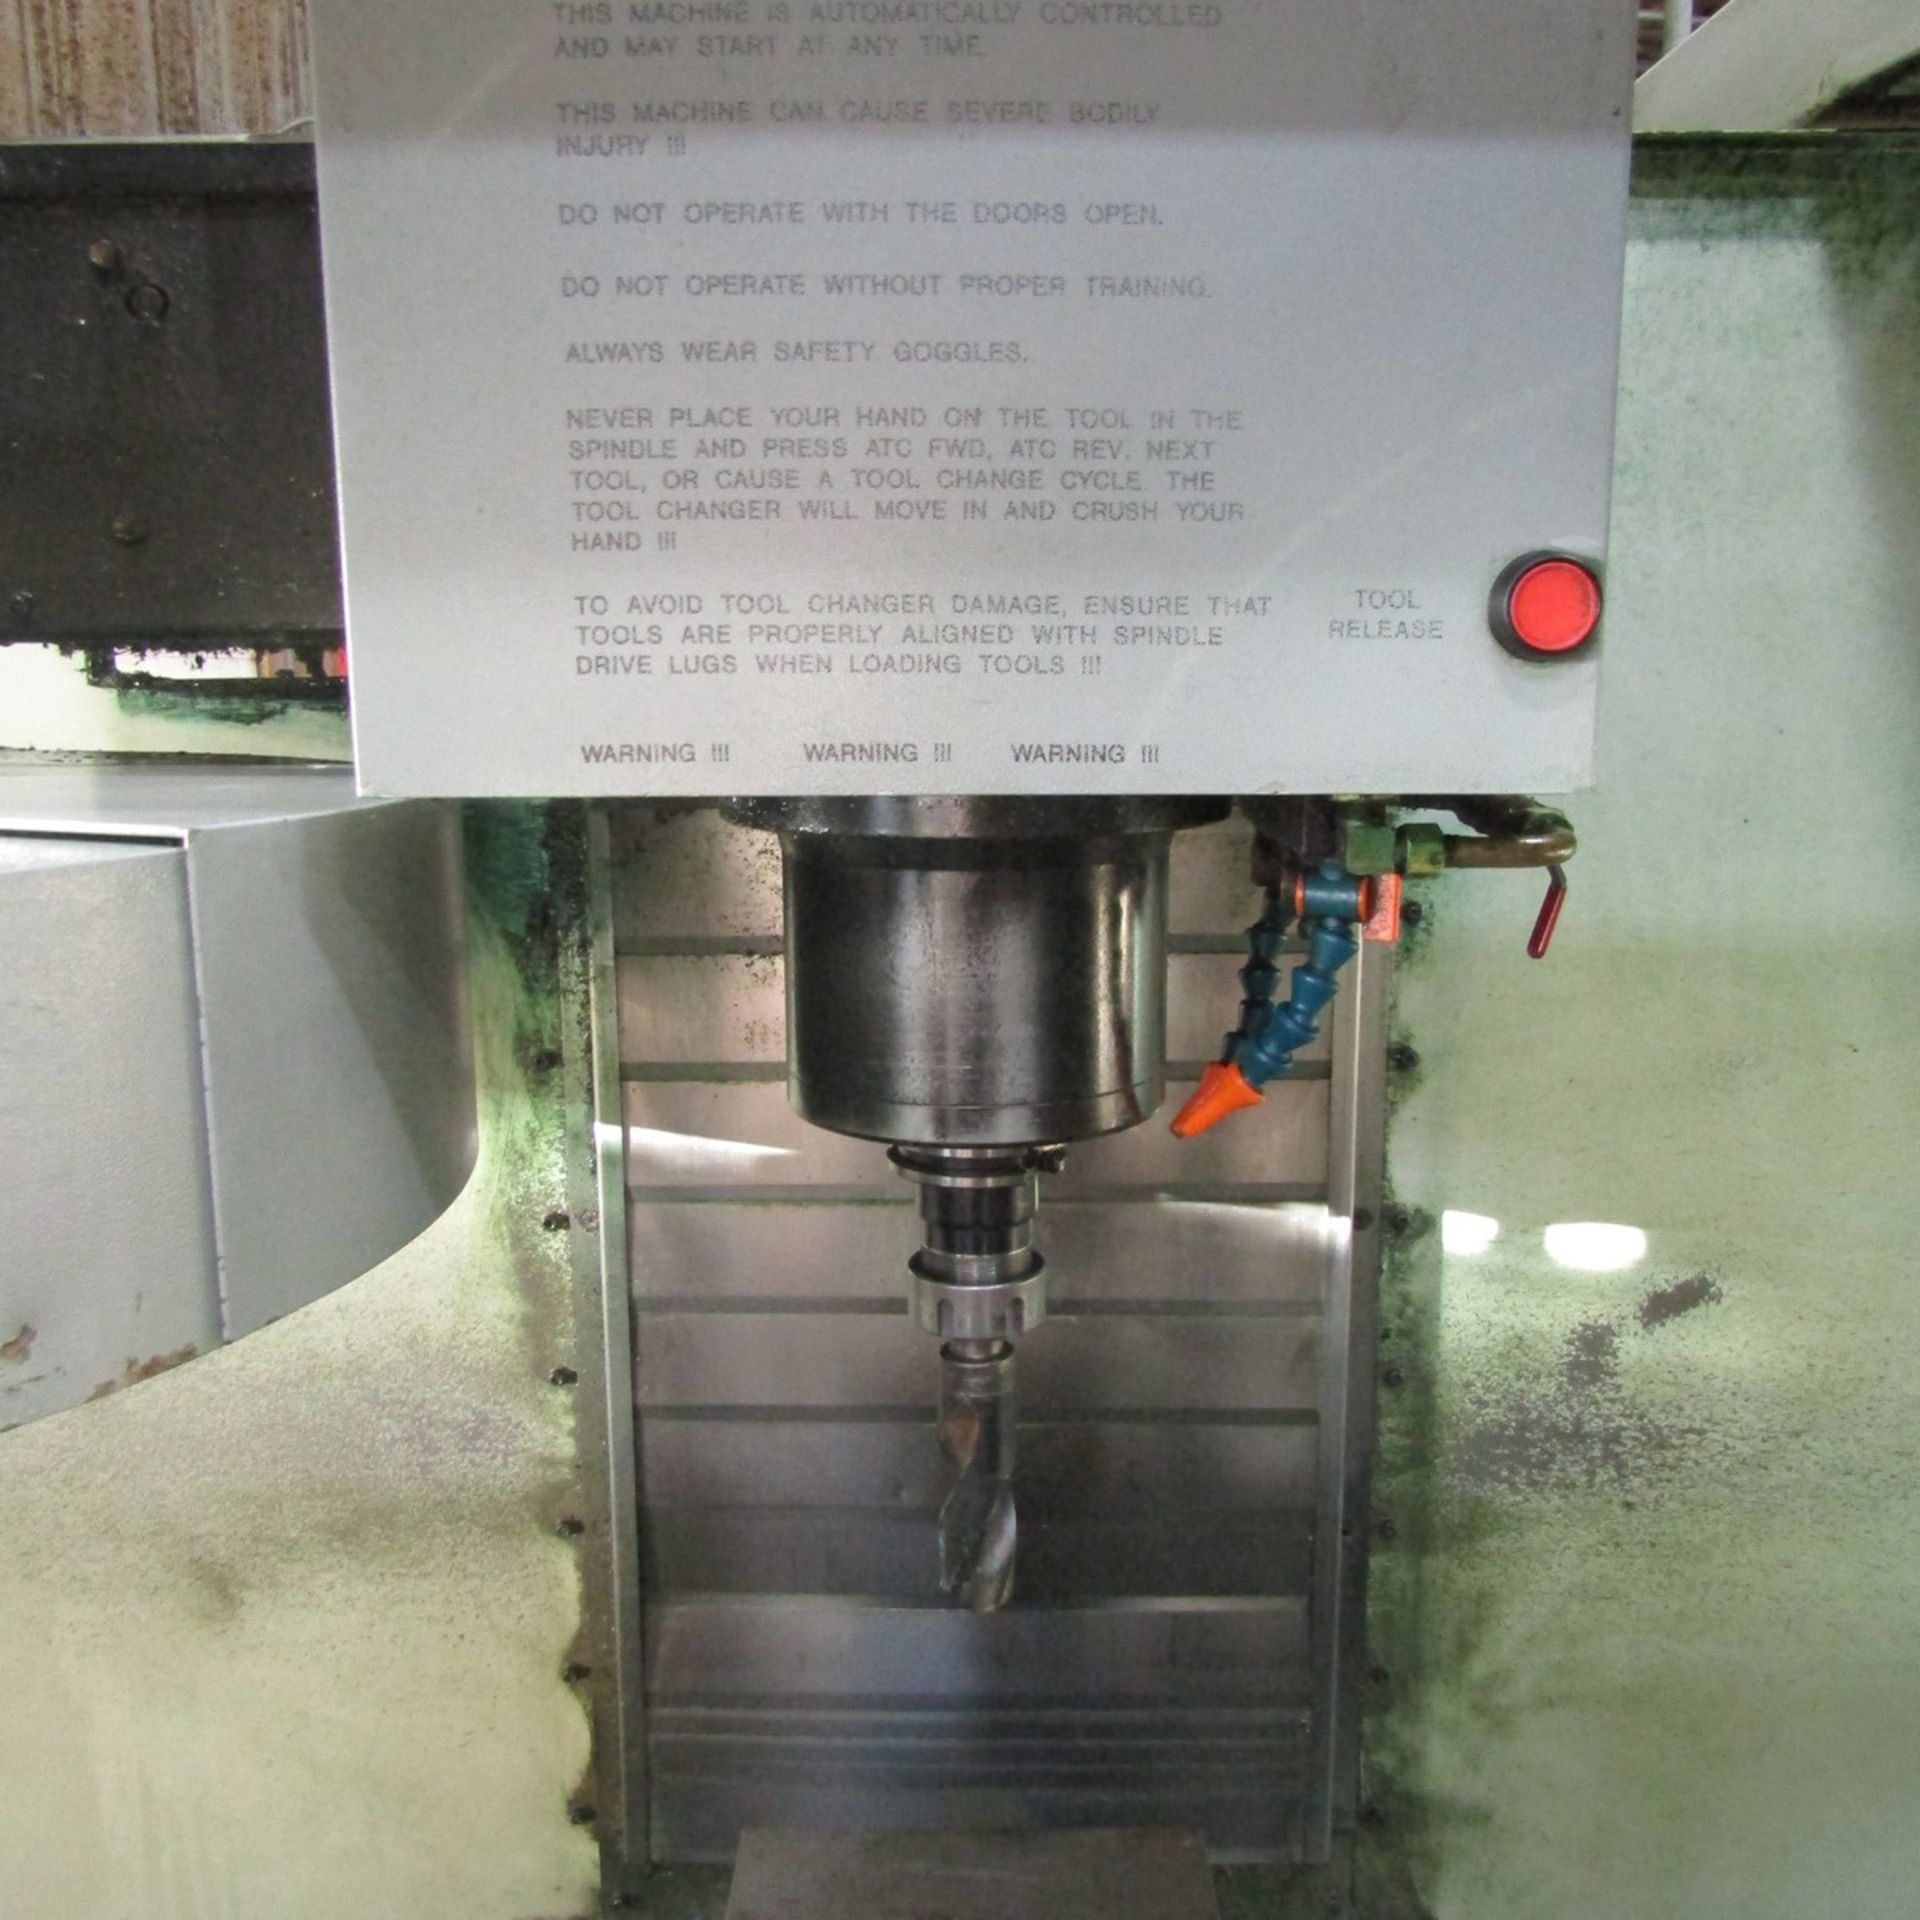 1995 Haas, Mdl: VF-1 Vertical Machining Center 20 ATC, 14" x 26" T-Slotted Table, 8" Kurt II Machine - Image 3 of 8